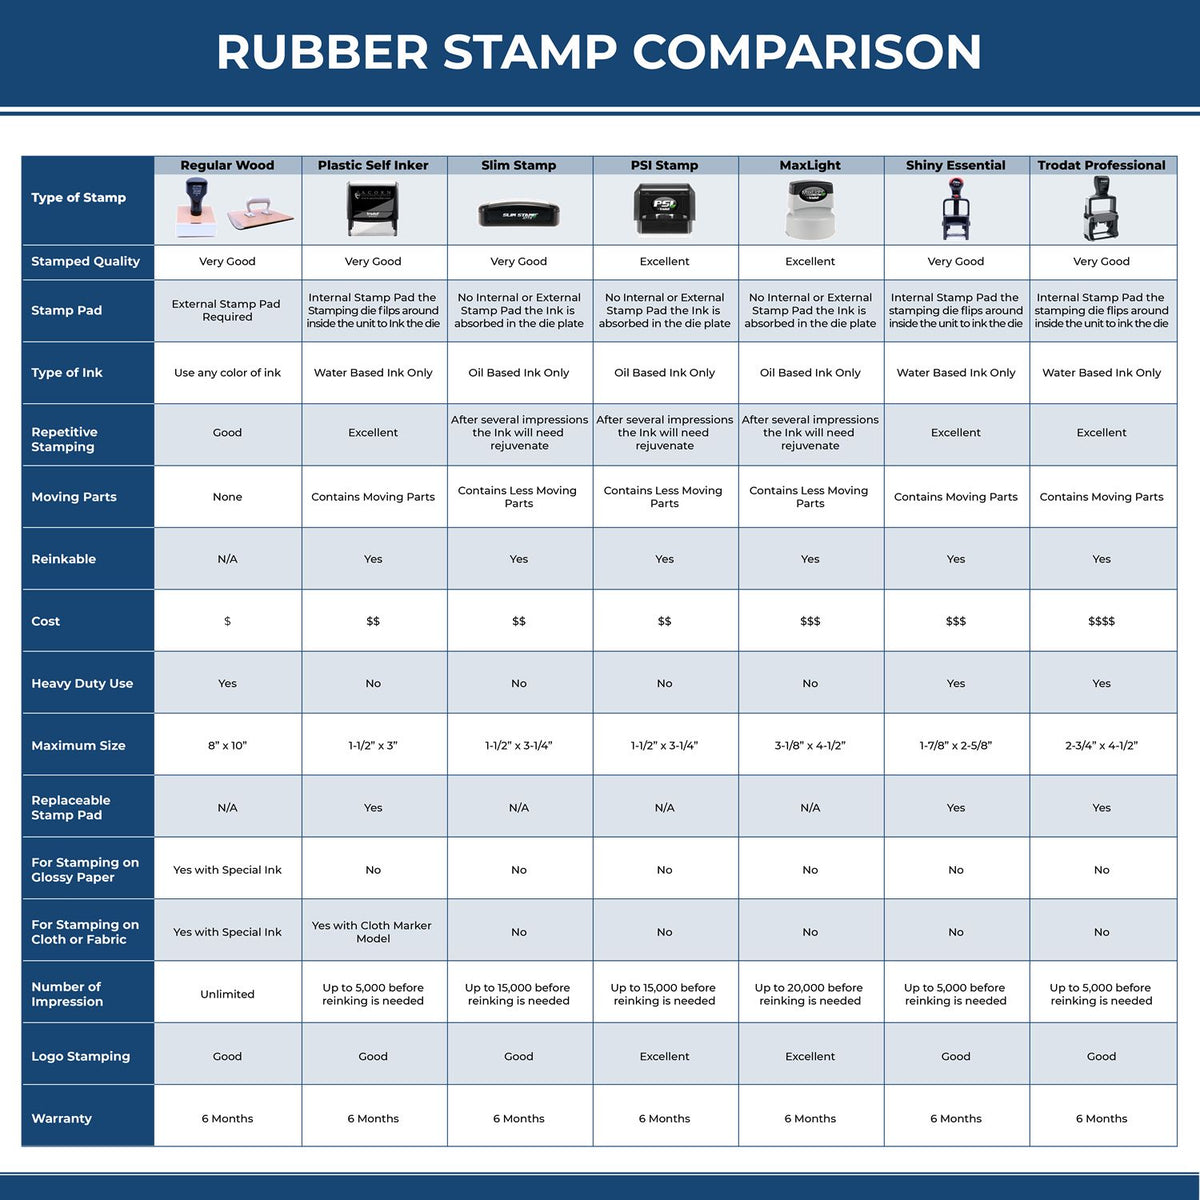 Large Self-Inking Strikeout Stamp 5579S Rubber Stamp Comparison